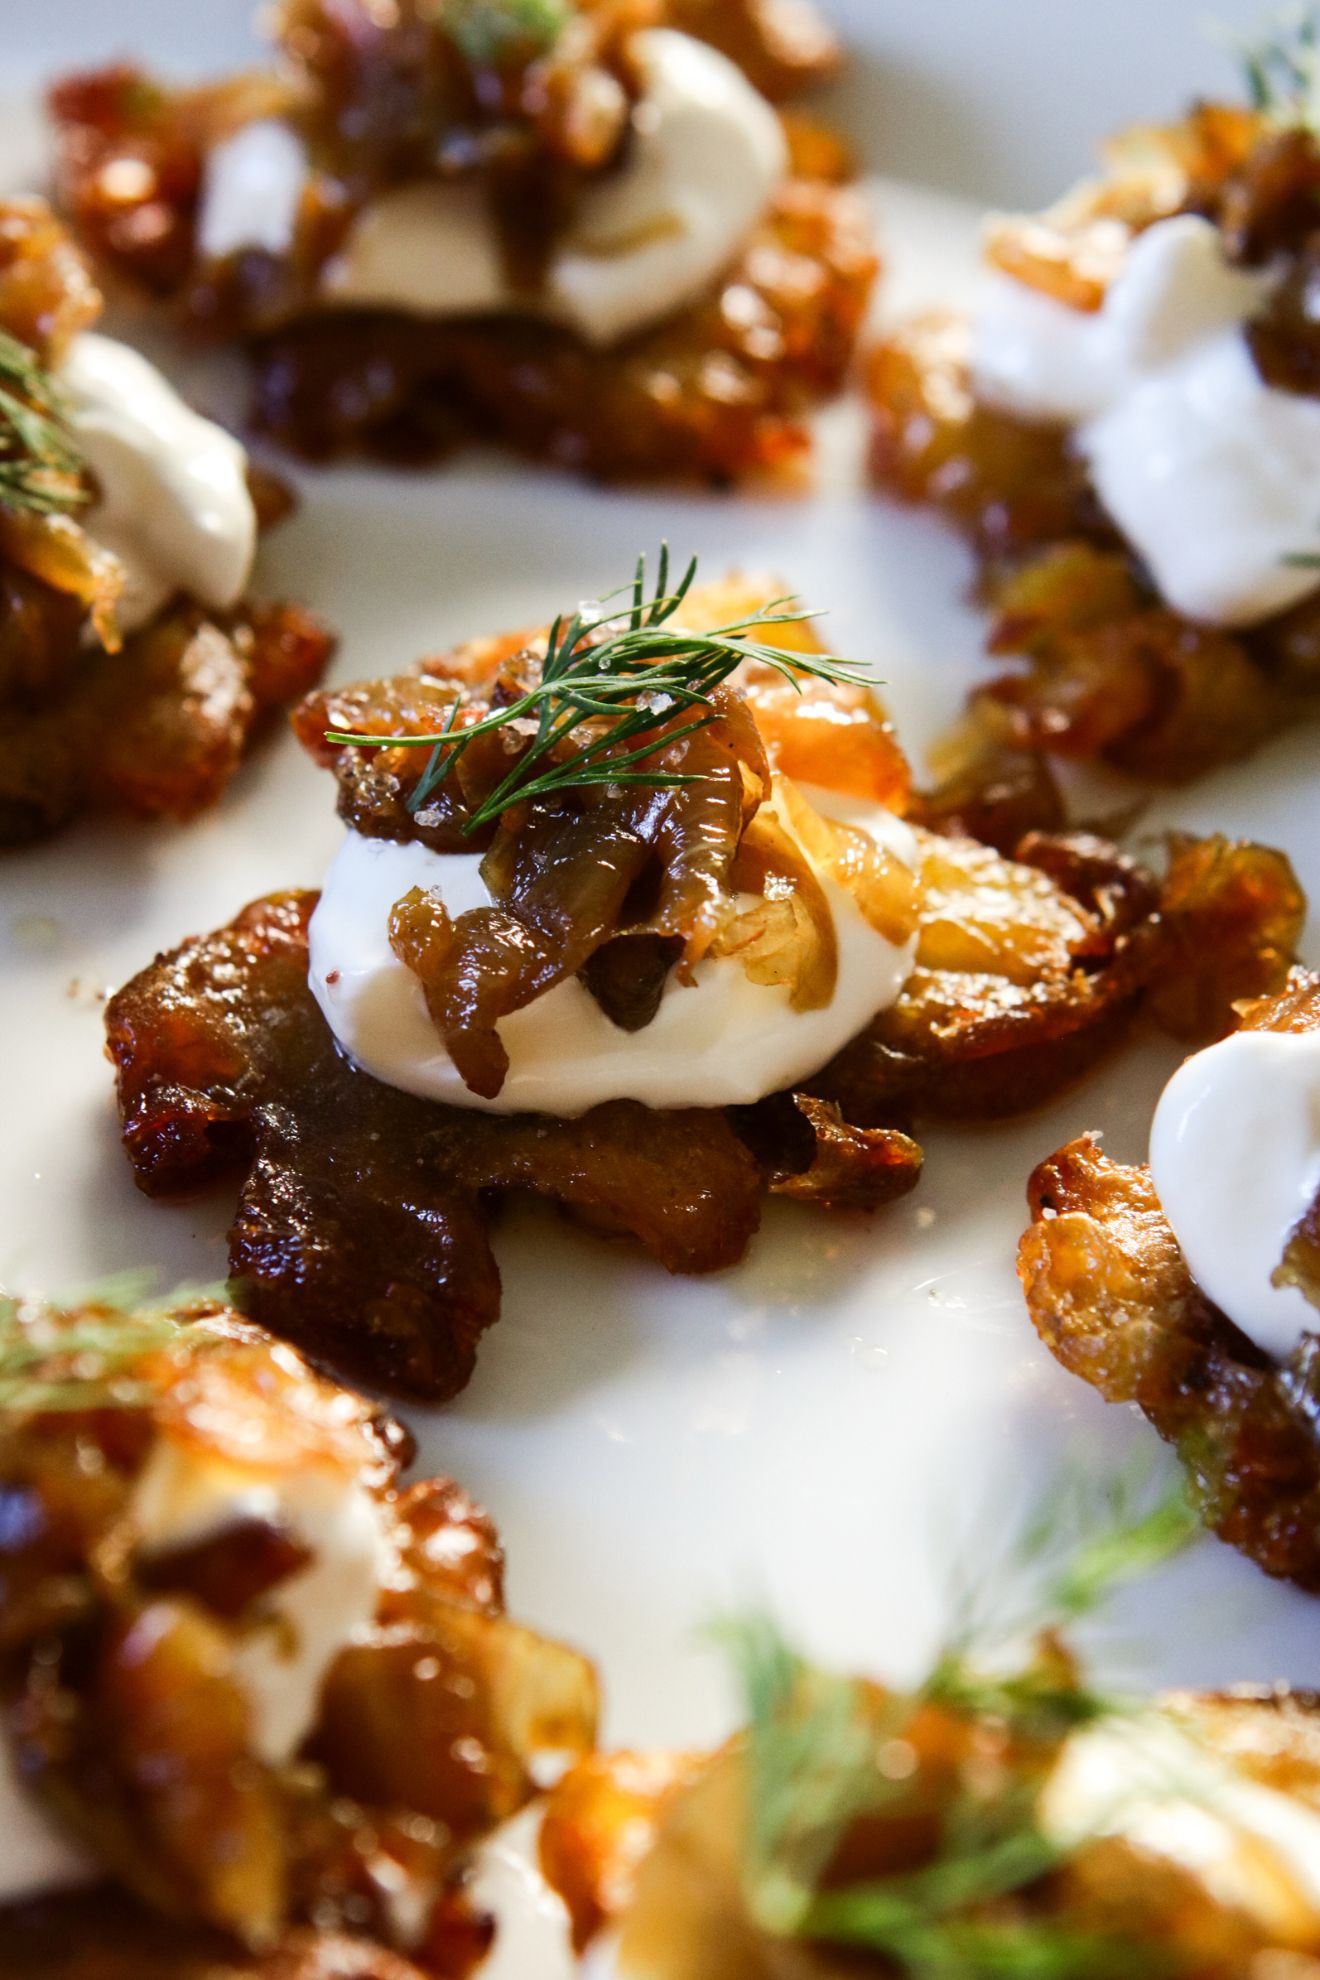 Crispy Smashed Potatoes with Pickles and Gin-Spiked Sour Cream